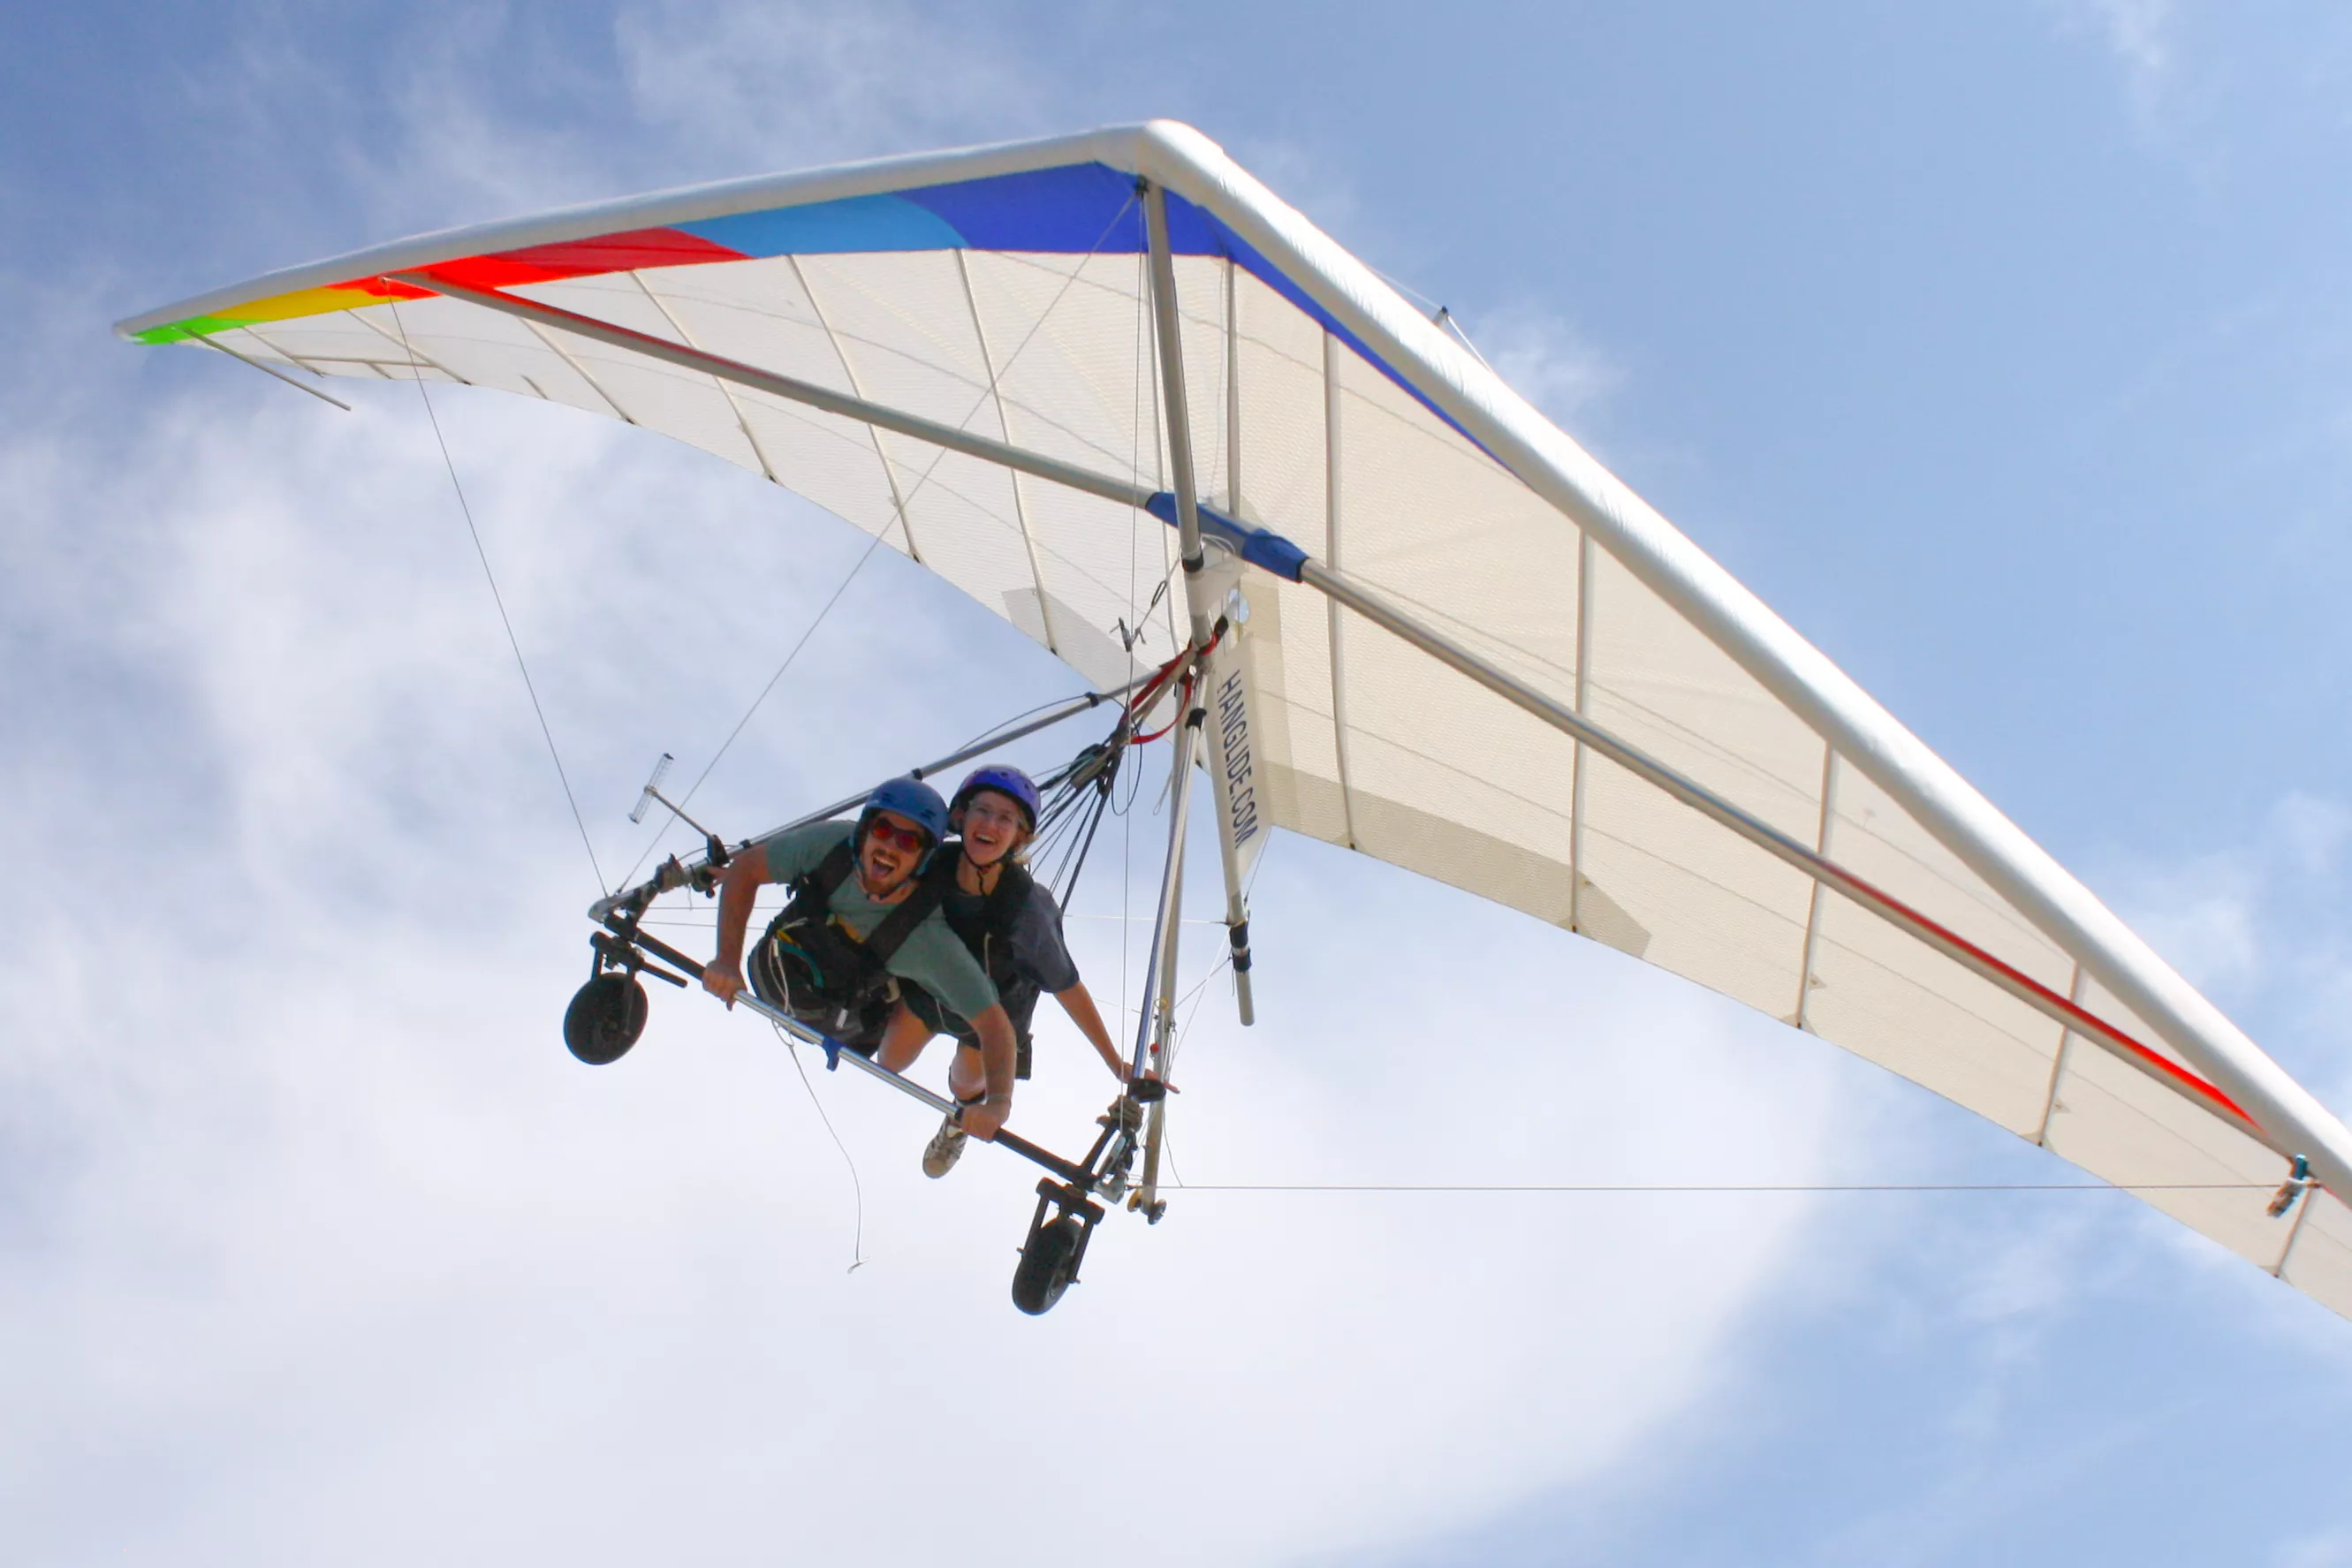 Lookout Mountain Hang Gliding in USA, North America | Hang Gliding - Rated 4